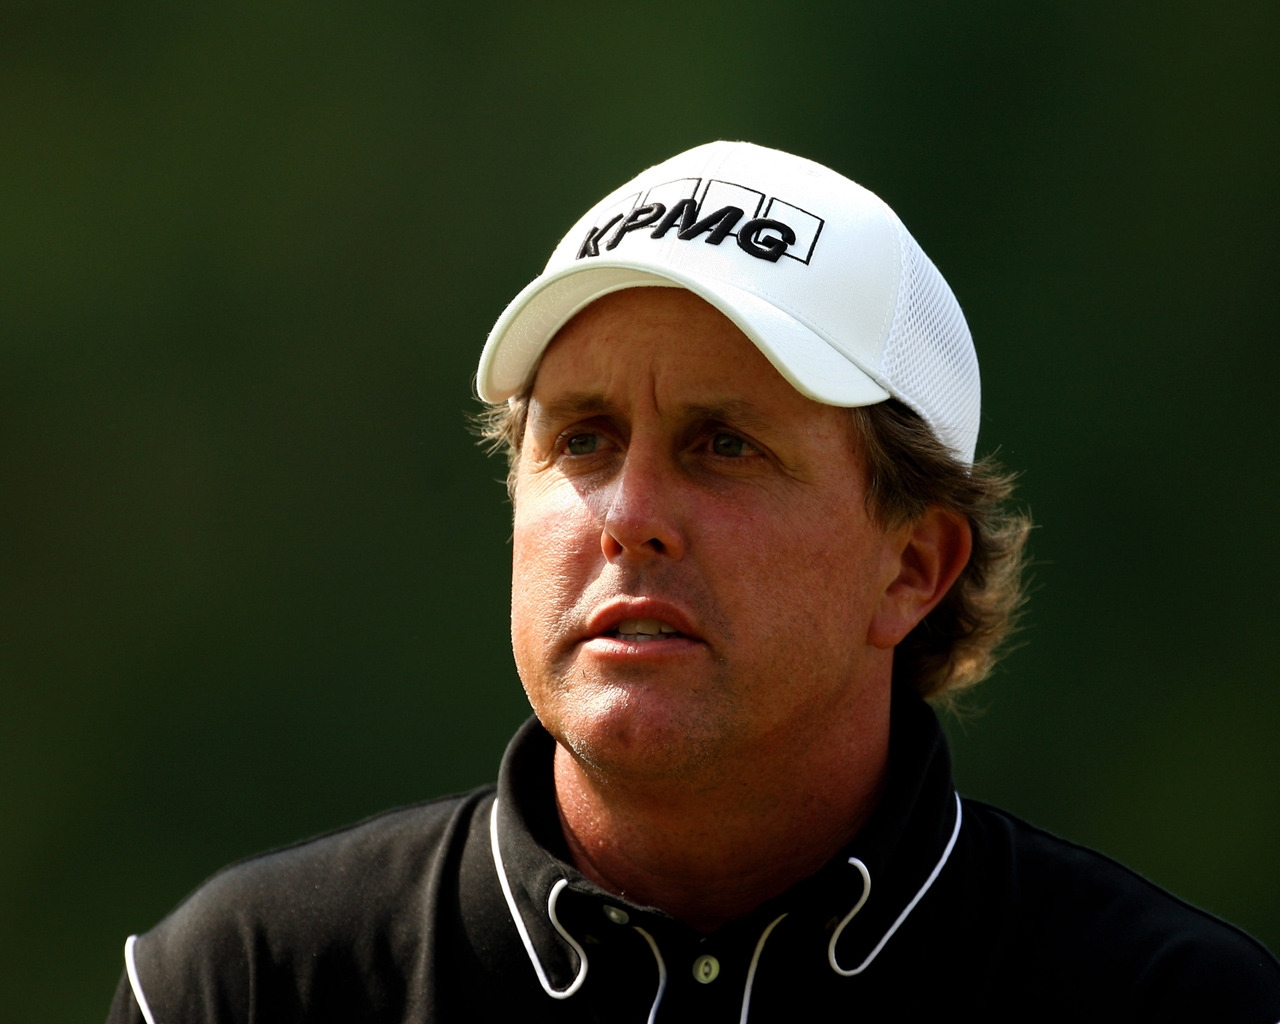 Philip Mickelson for 1280 x 1024 resolution